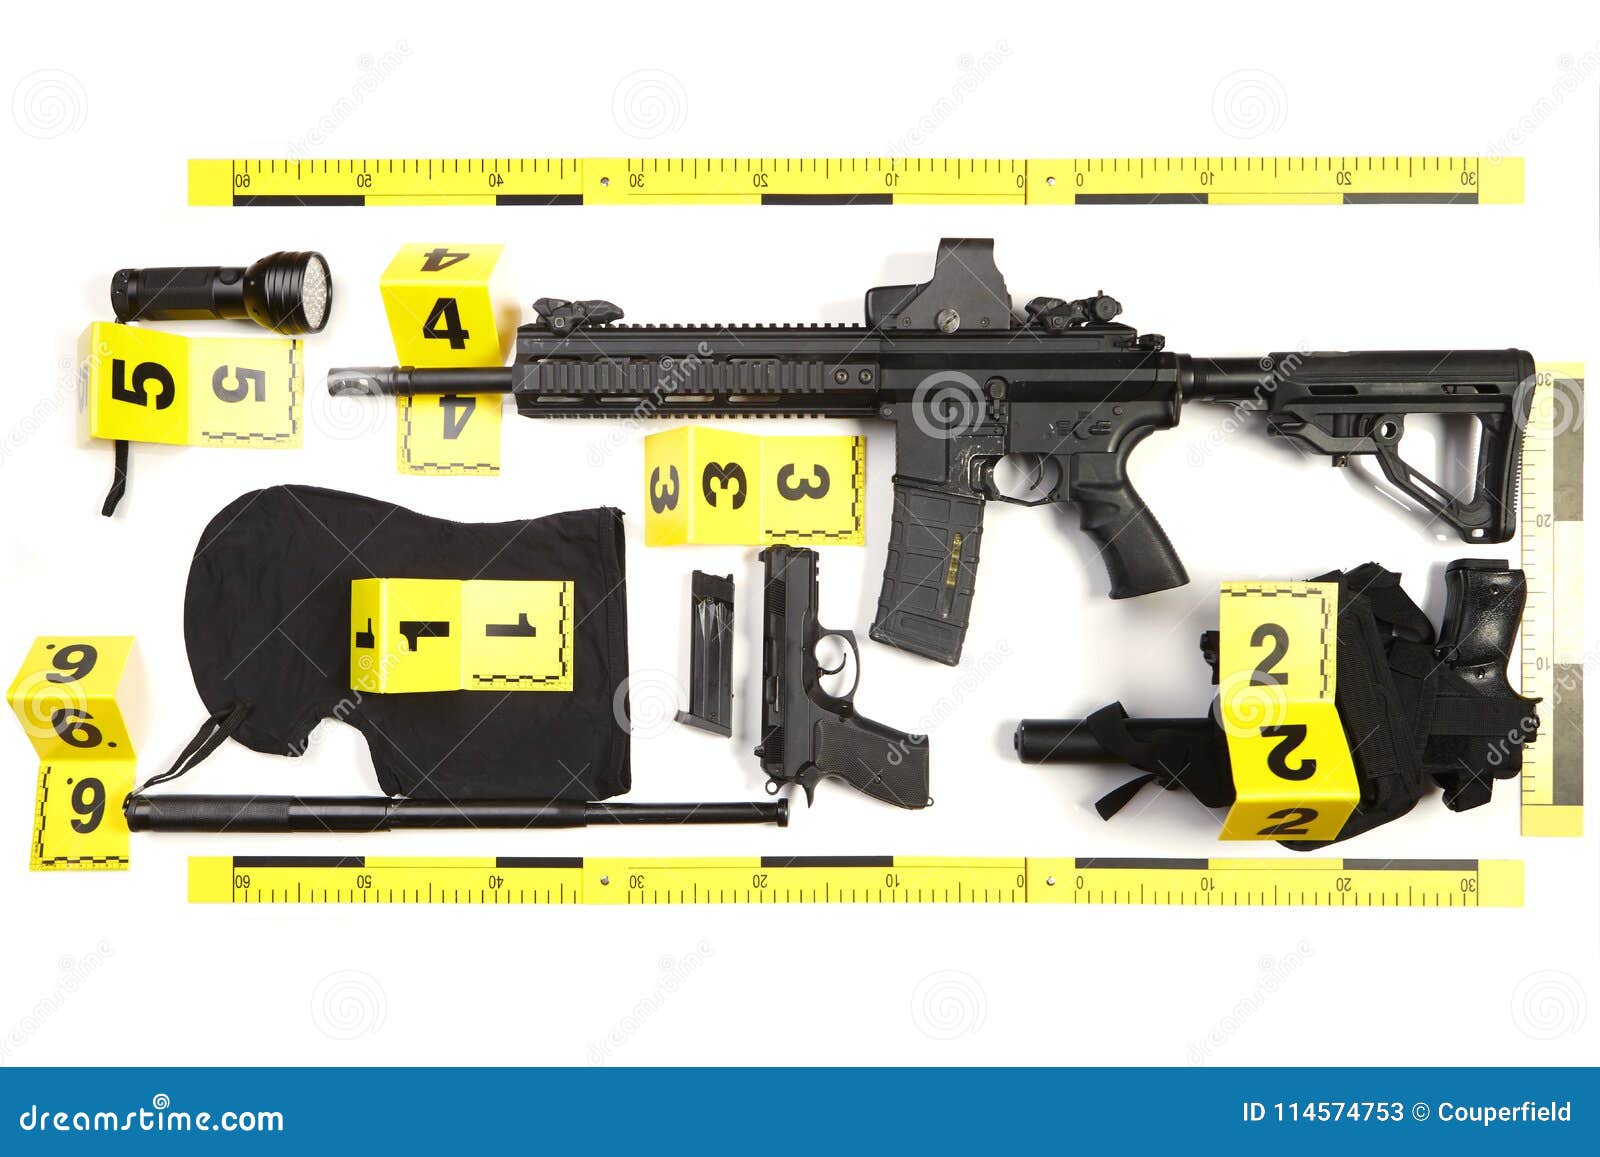 police photo evidence of seized automatic gun and other weapons and contraband